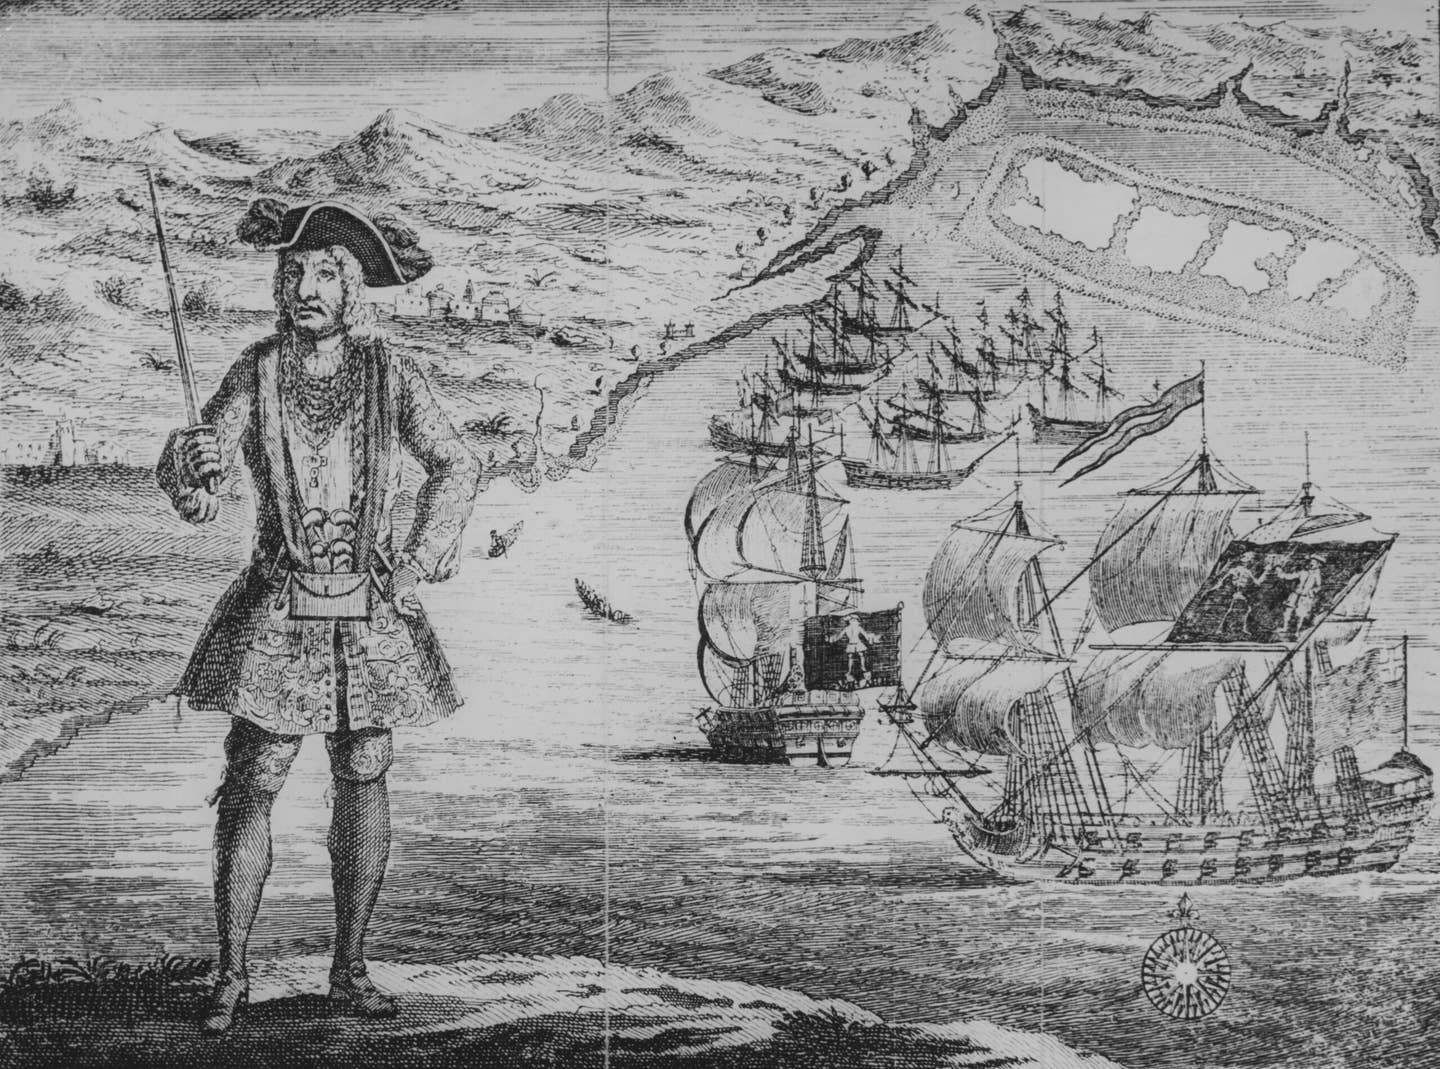 Another depiction of the Welsh pirate Bartholomew Roberts. Behind him are two of the ships under his command, the <em>Royal Fortune</em> and the <em>Ranger</em>. This engraving appeared in A History of the Pyrates by Capt. Charles Johnson, circa 1724. <em>Photo by Hulton Archive/Getty Images</em>